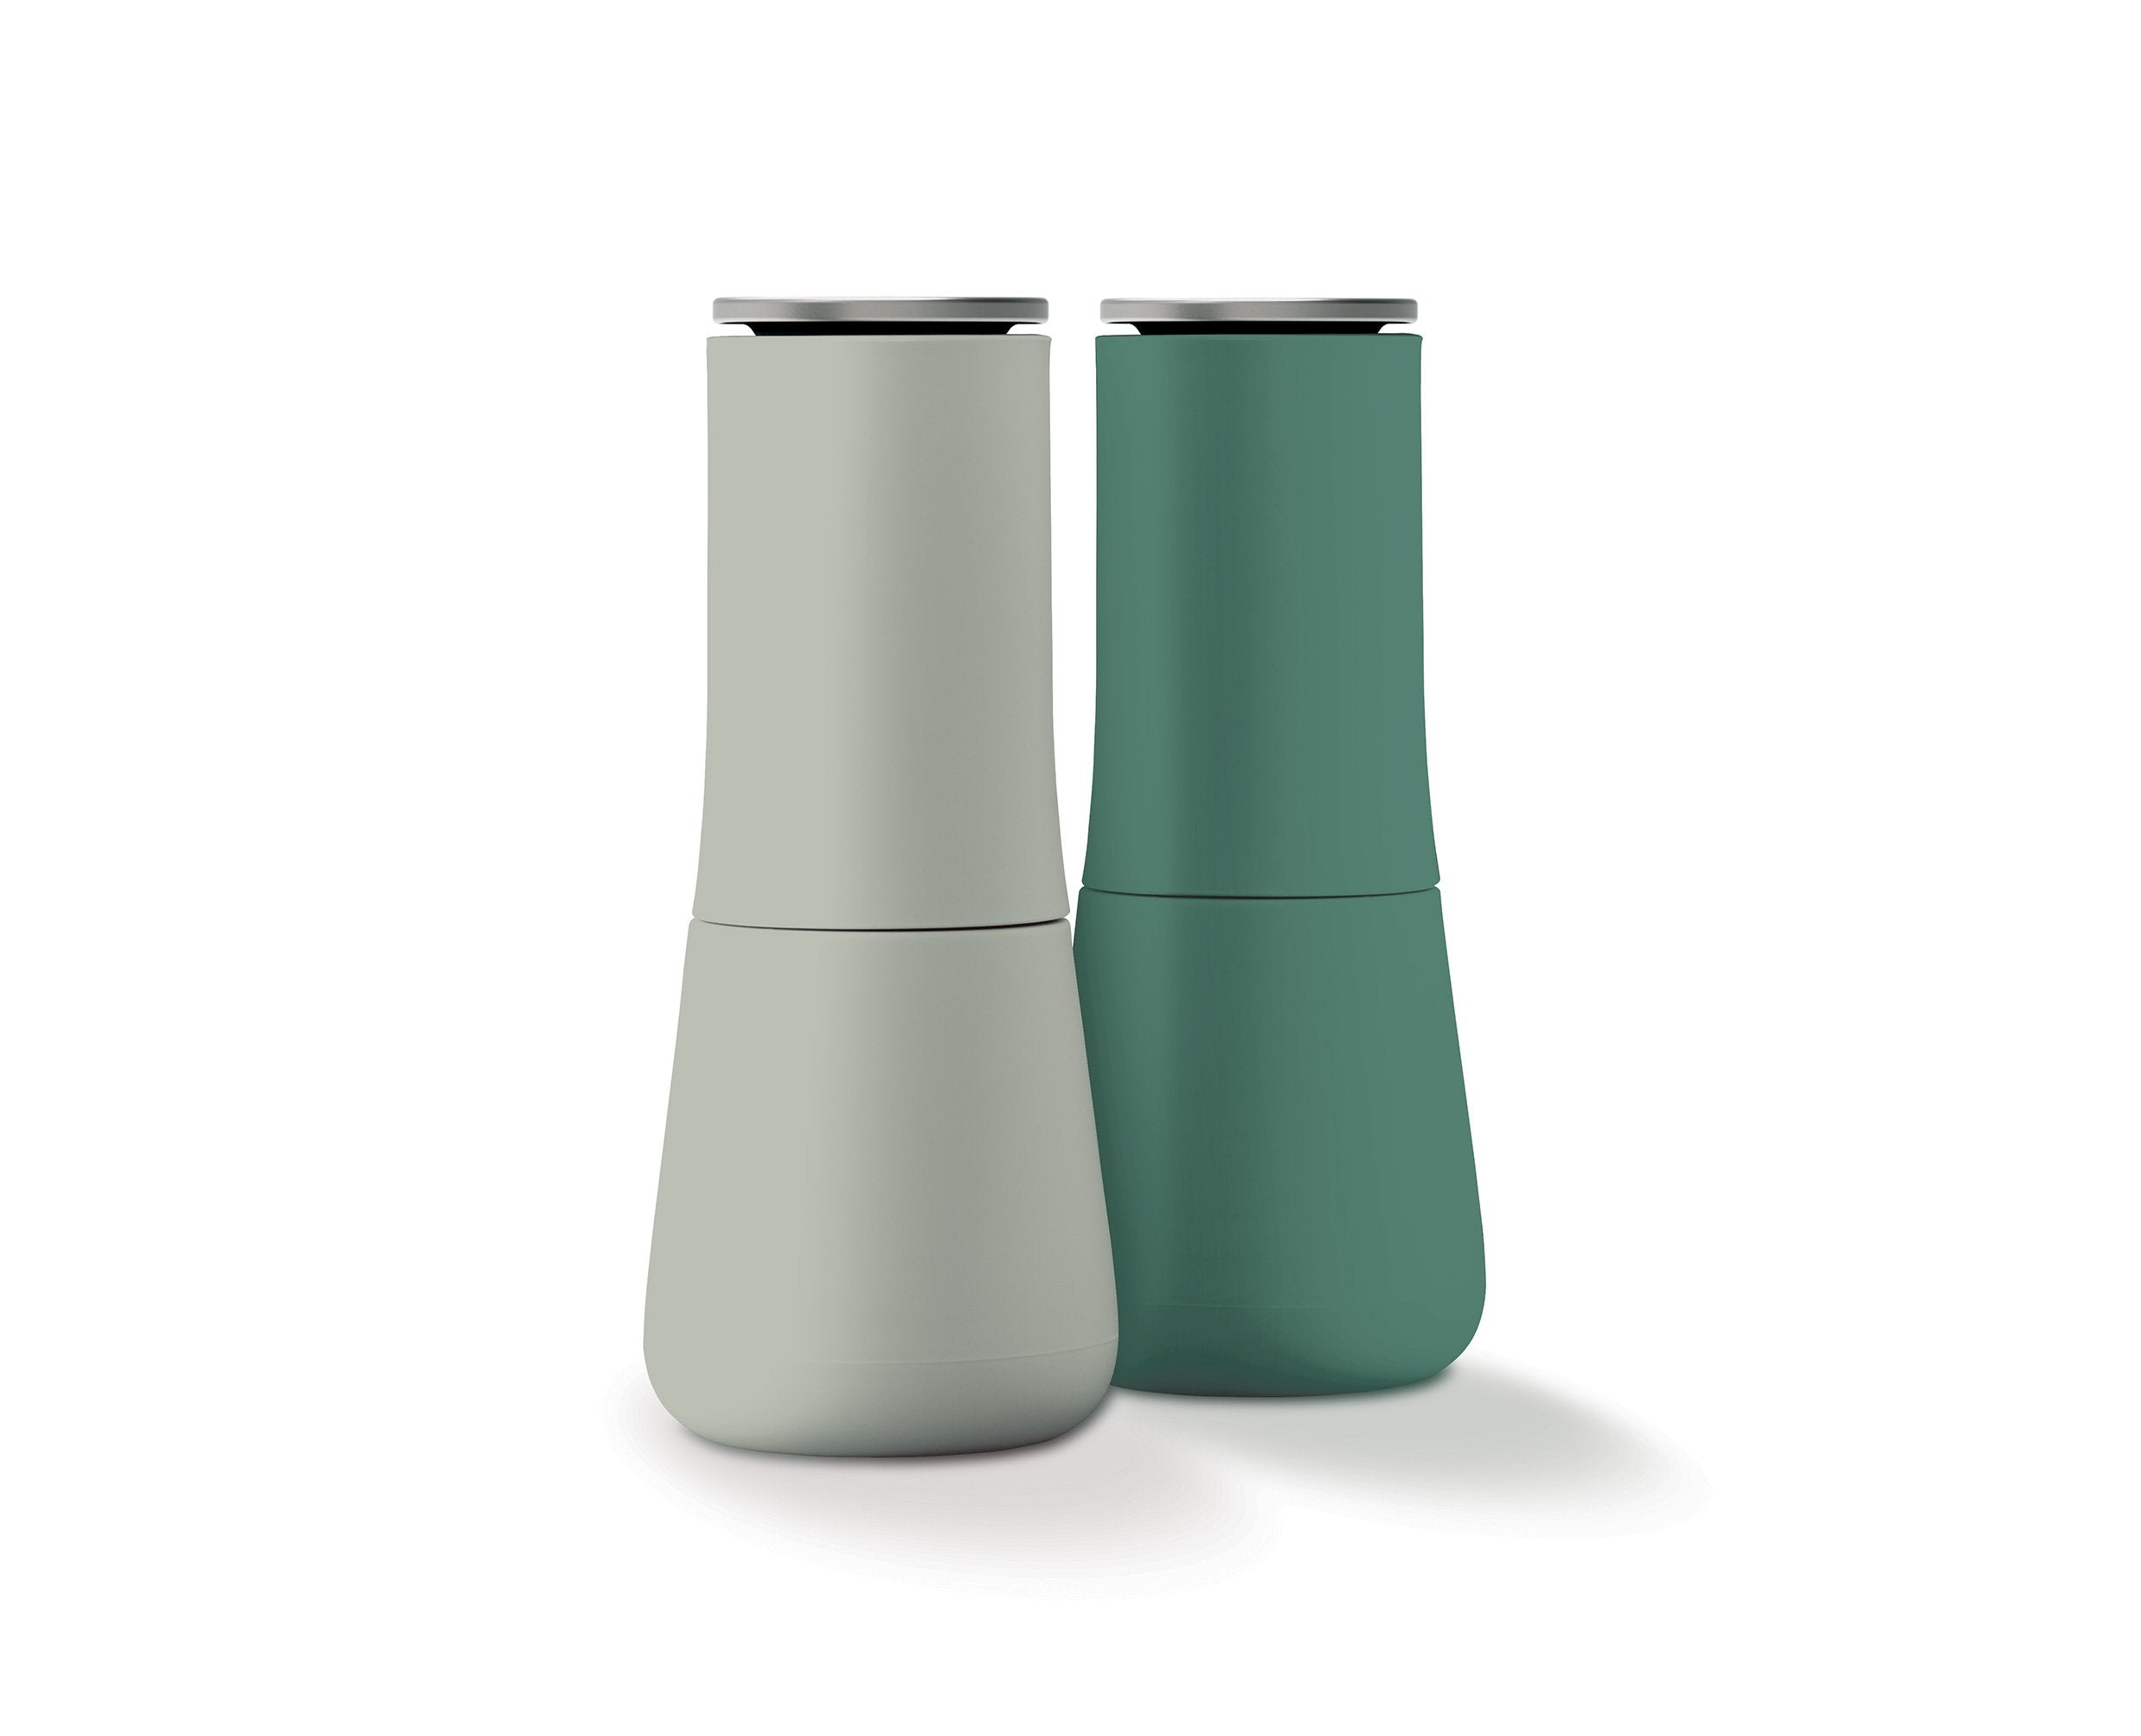 BEON.COM.AU  Create a statement piece on your counter top with our Milltop™ Salt & Pepper Mills now available in the hues of green of our Editions range. The clever design of these elegant salt and pepper mills means the grinding mechanism is at the top so any excess grounds fall back inside the unit rat... Joseph Joseph at BEON.COM.AU